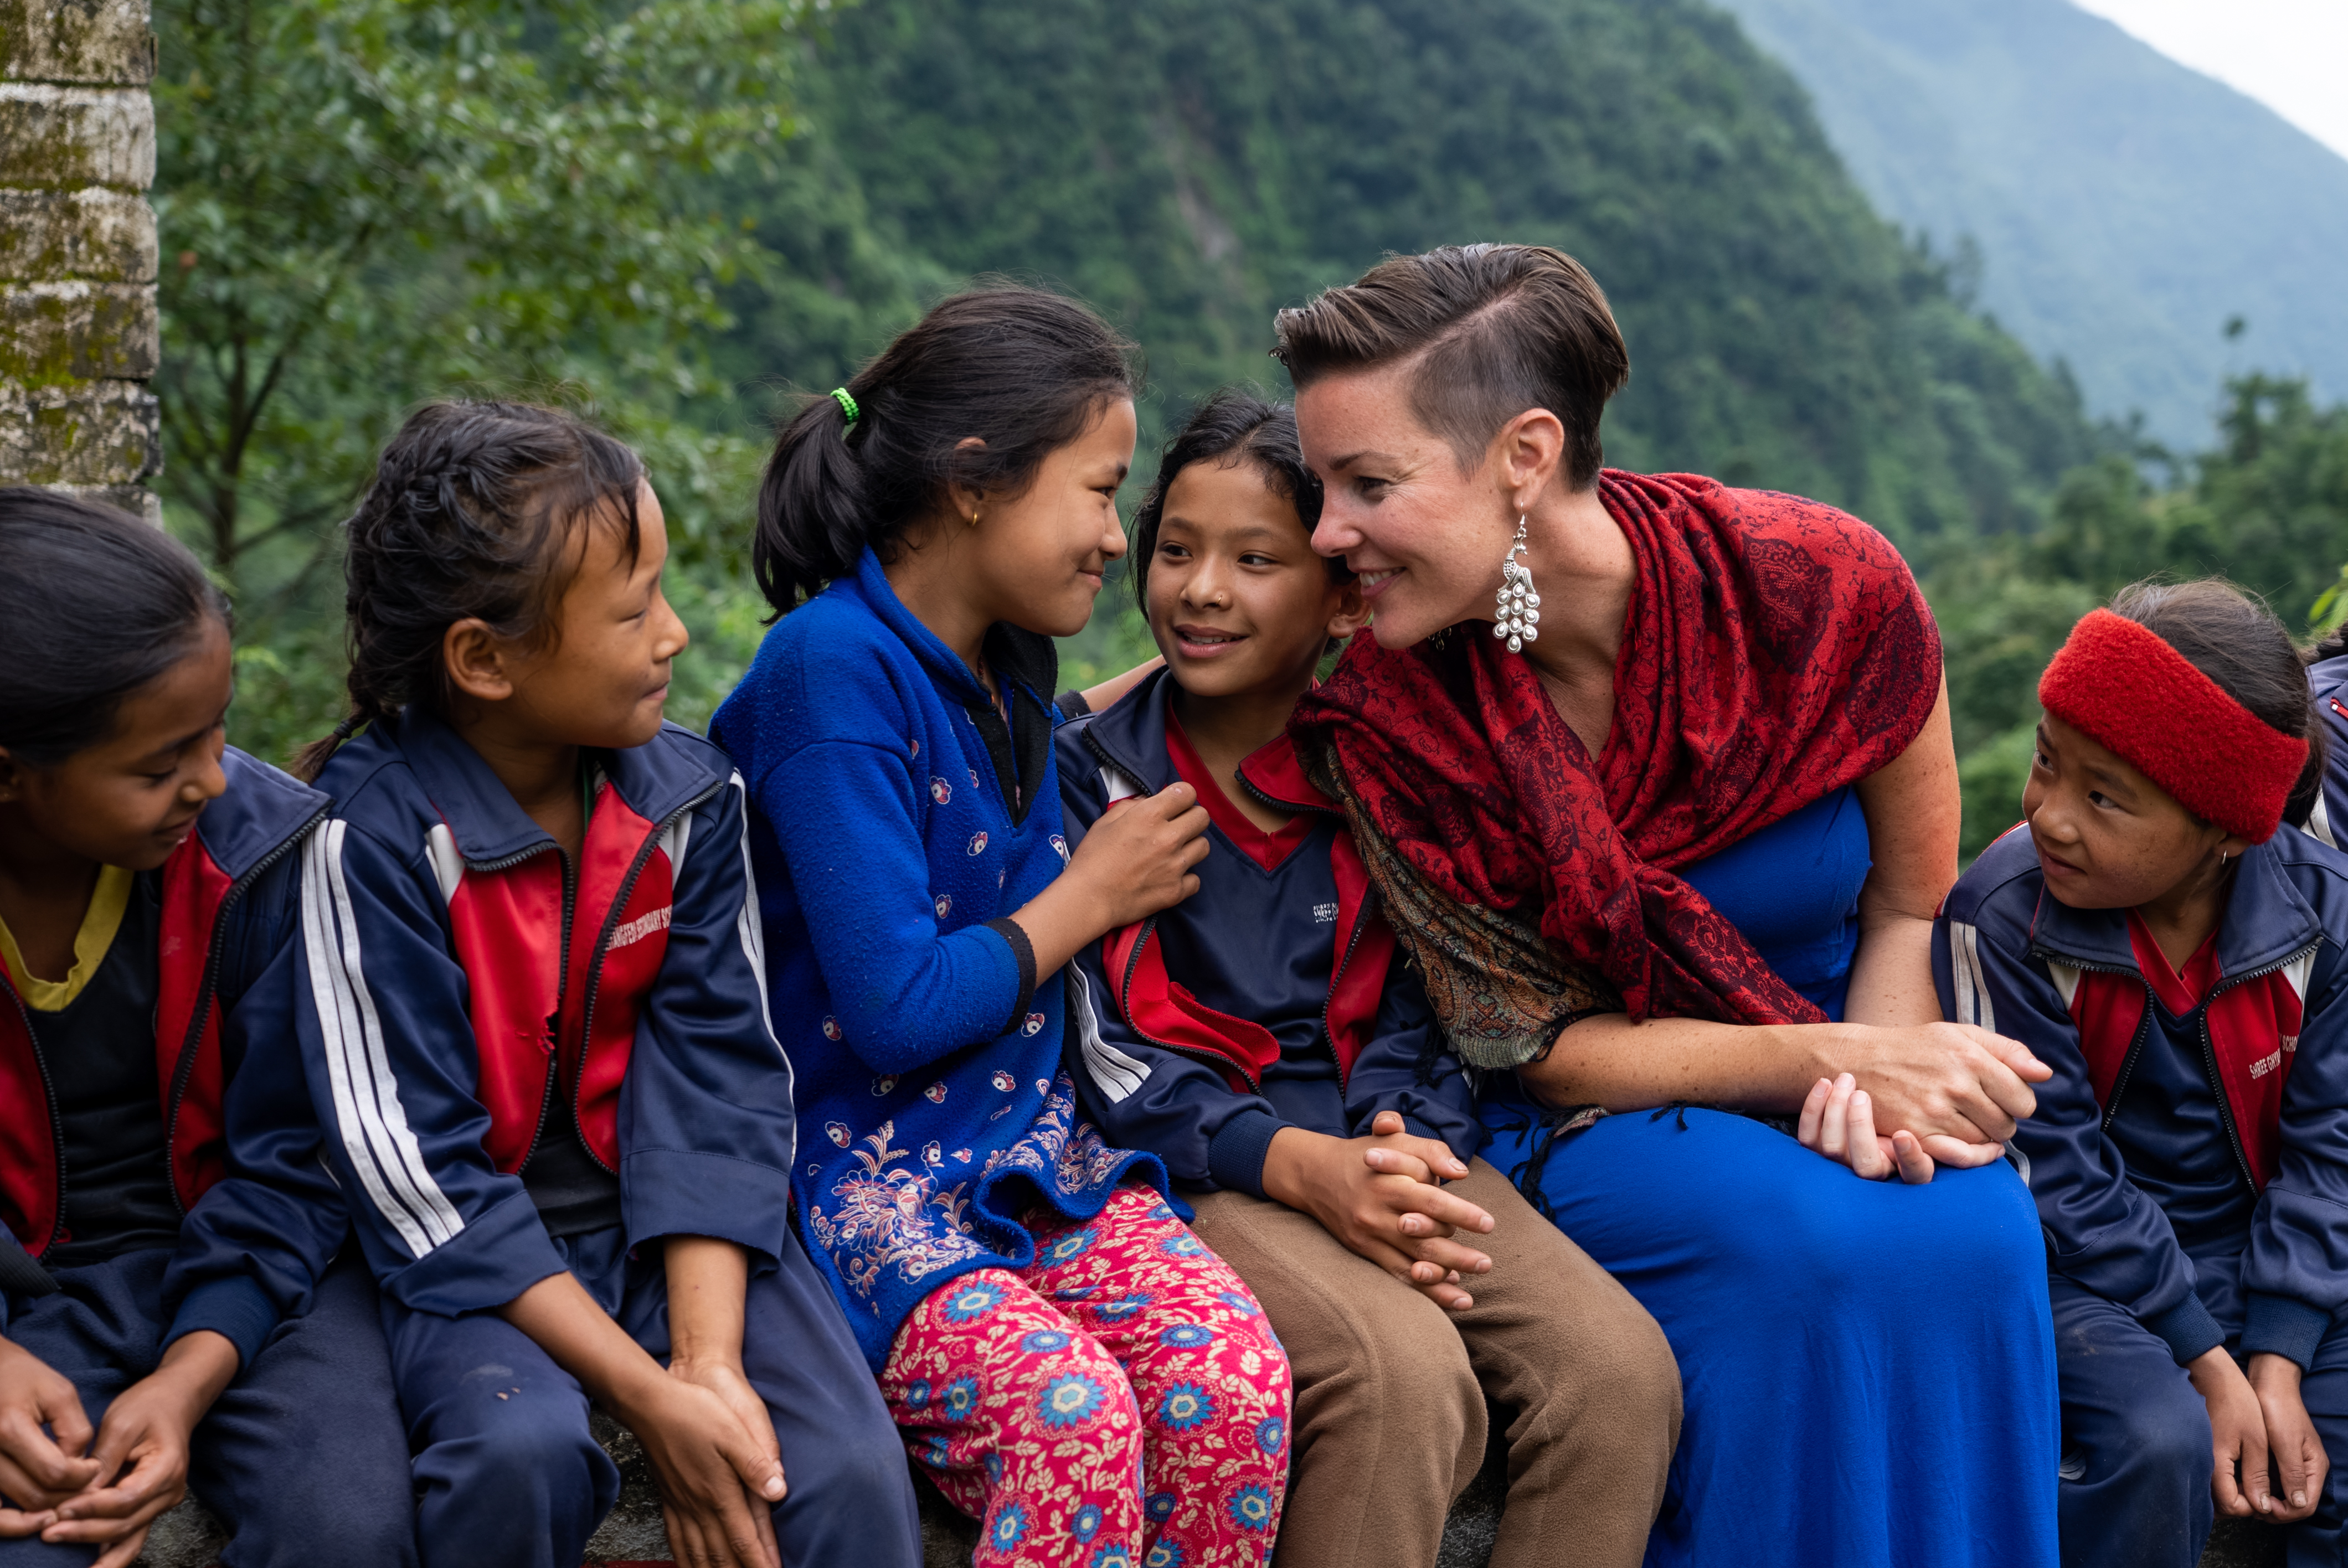 Working with orphans in Nepal